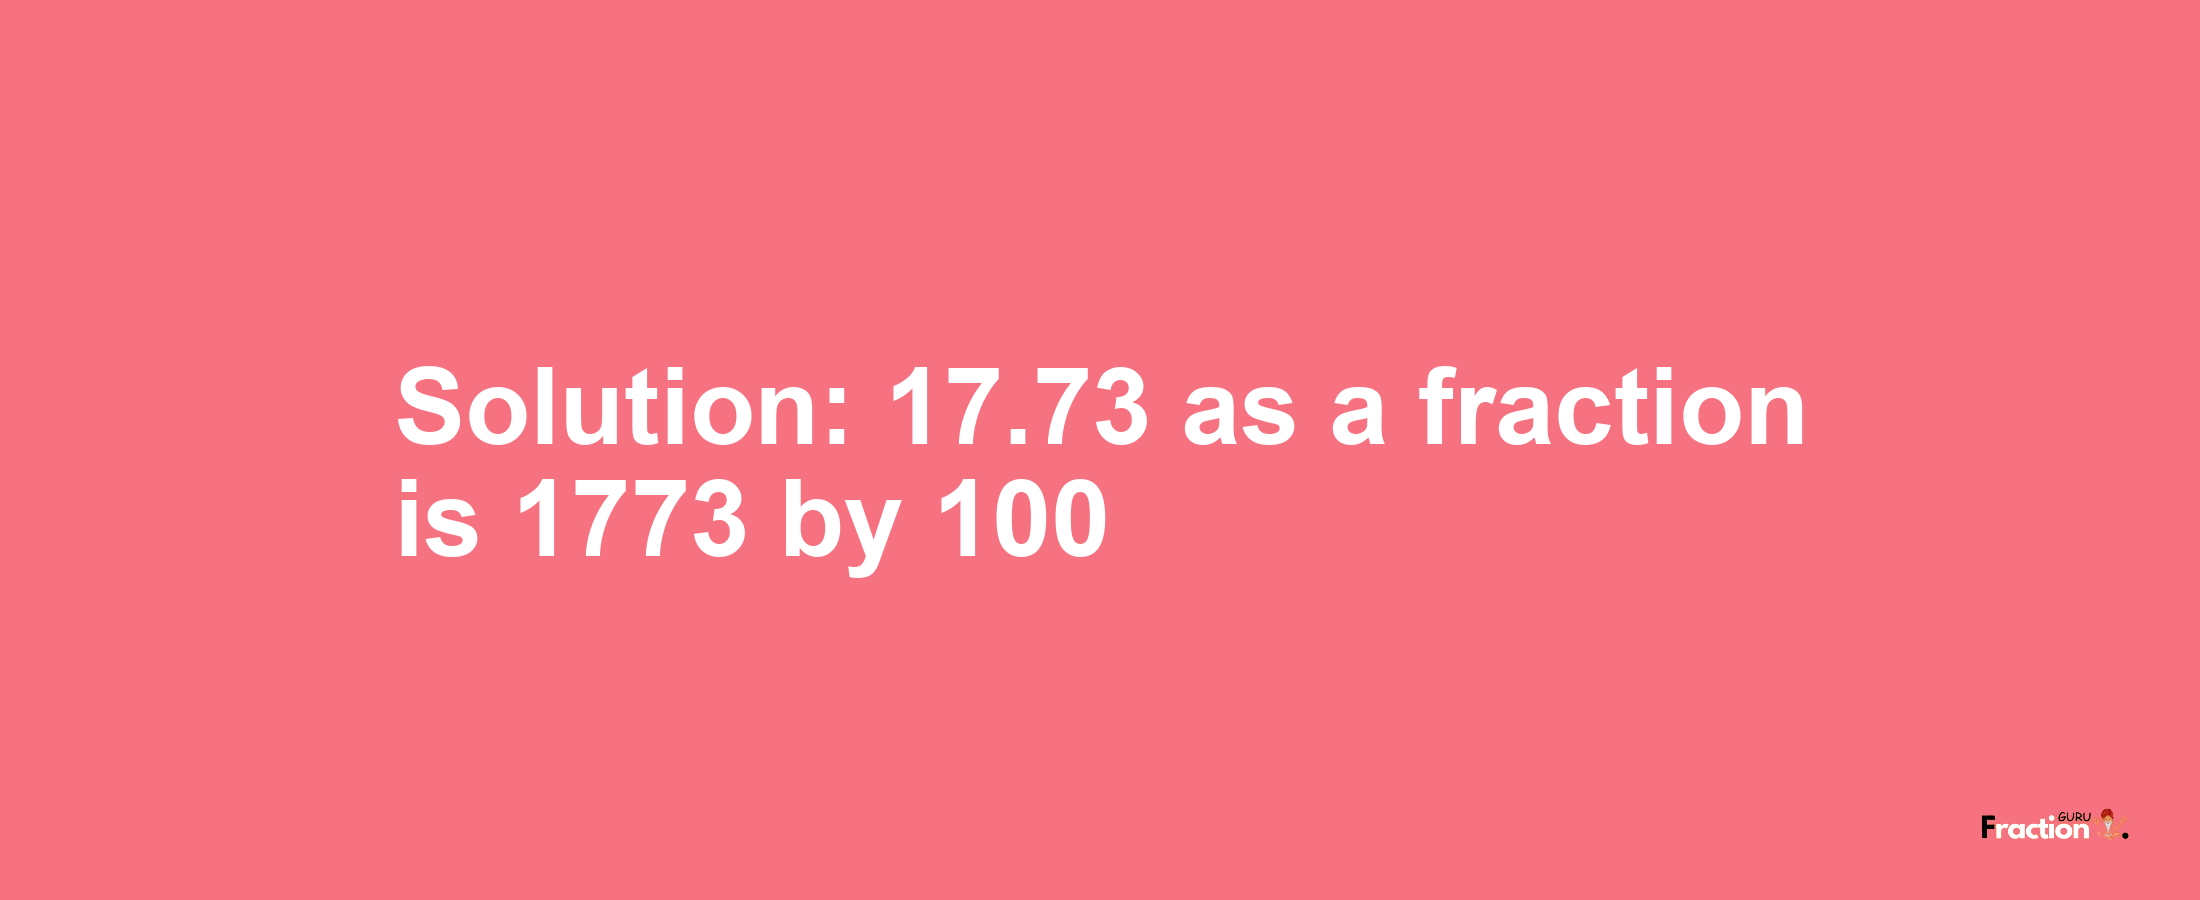 Solution:17.73 as a fraction is 1773/100